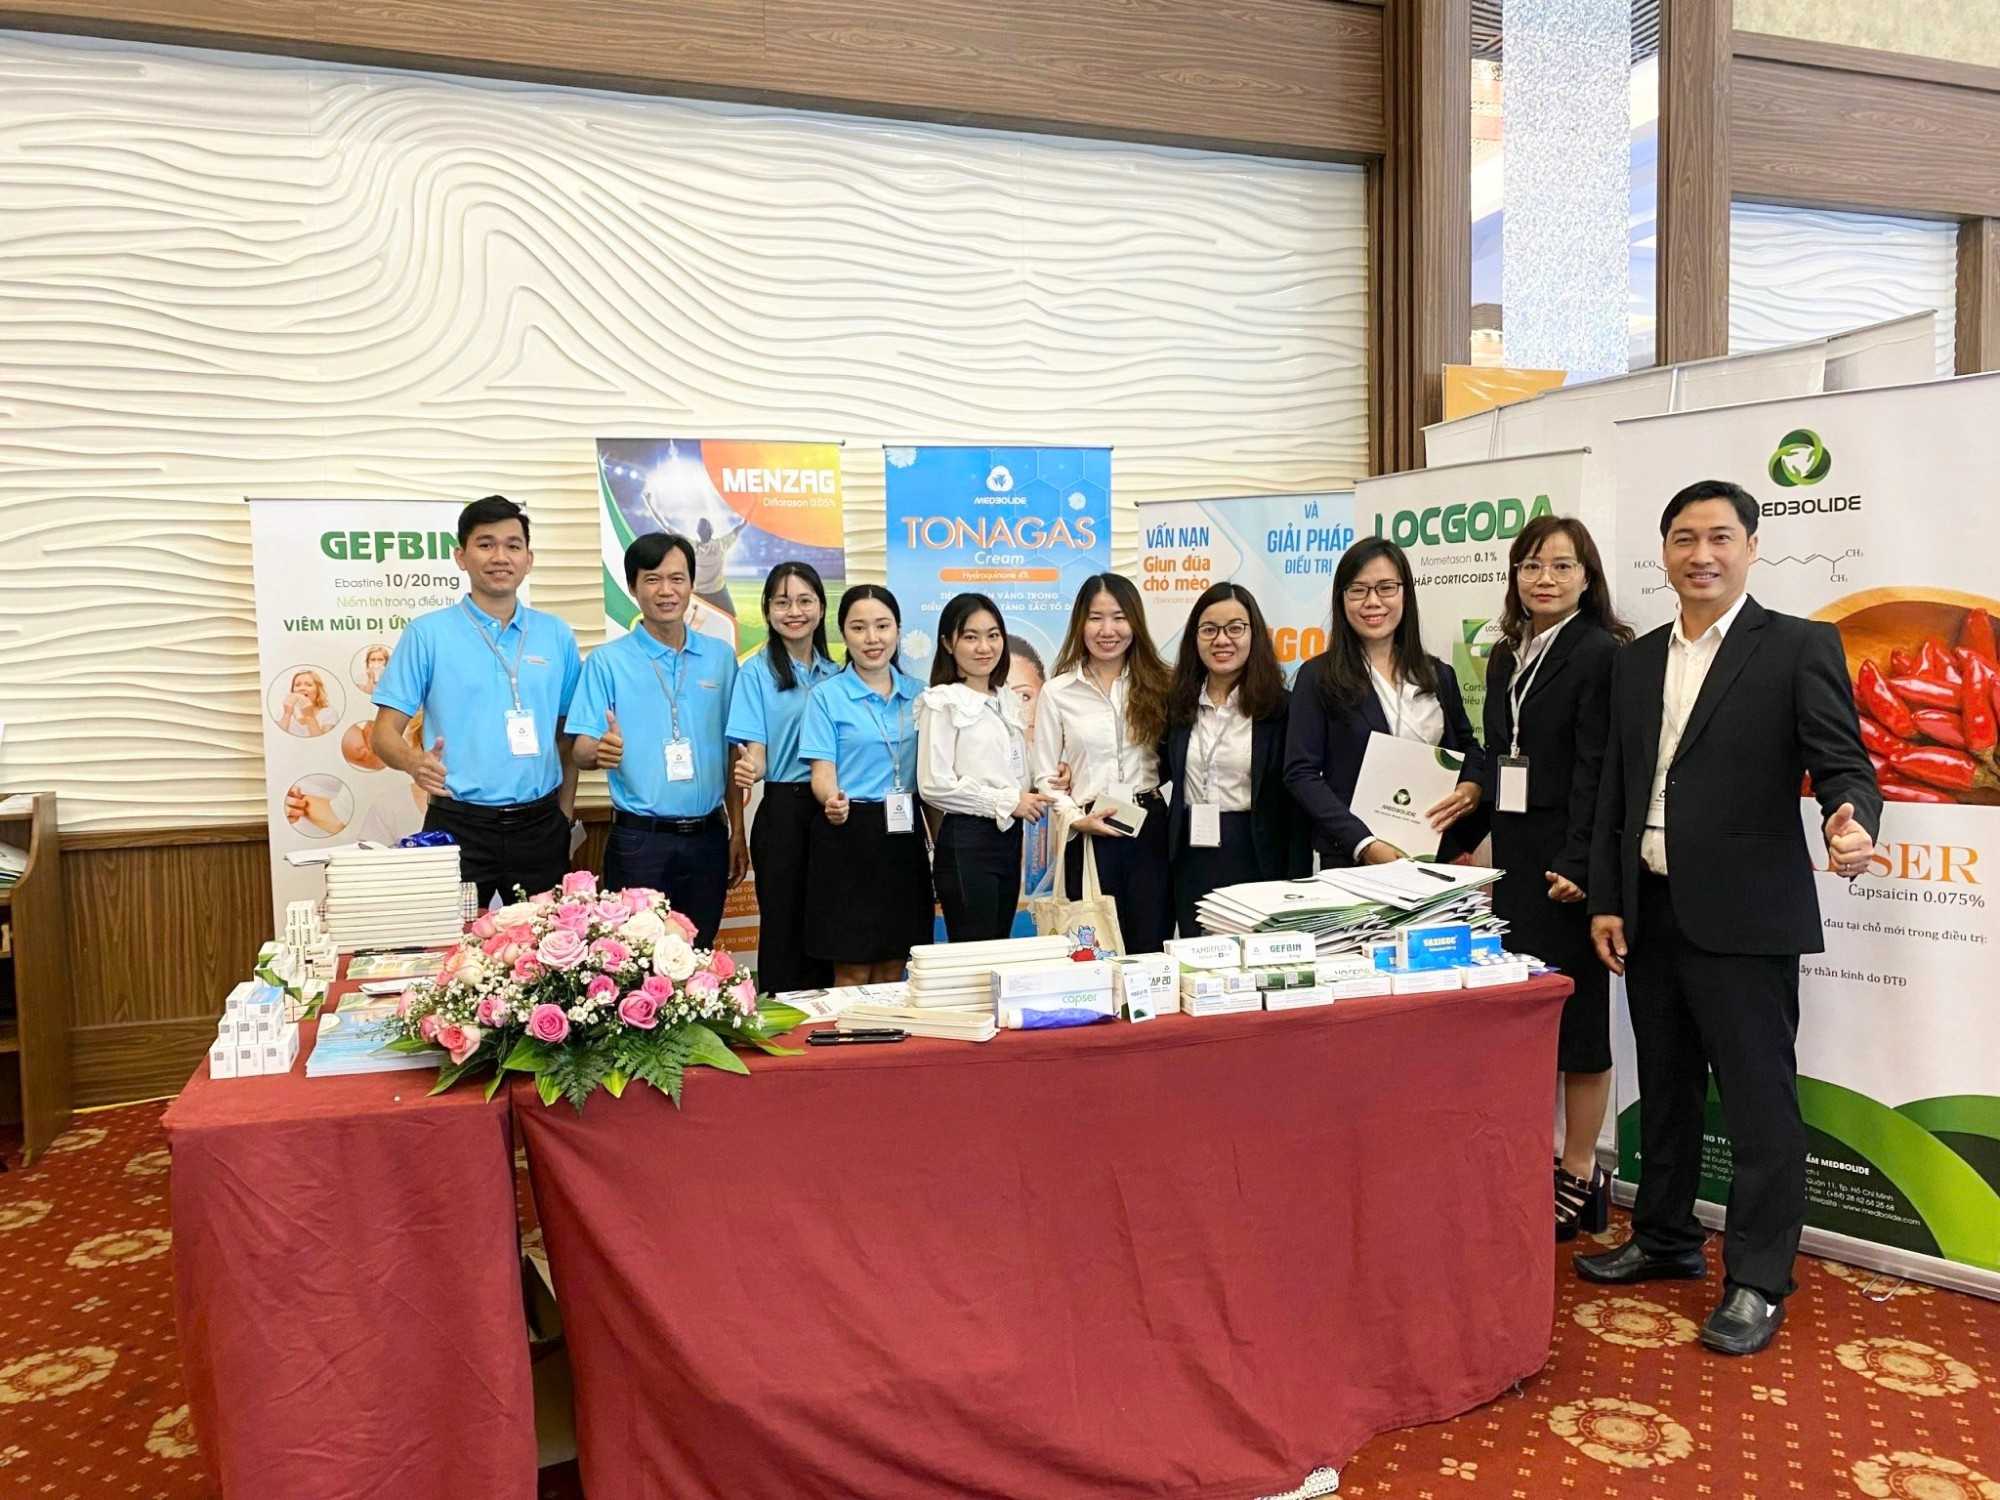 THE 3rd COSMETIC DERMATOLOGY SCIENTIFIC CONFERENCE IN CAN THO CITY